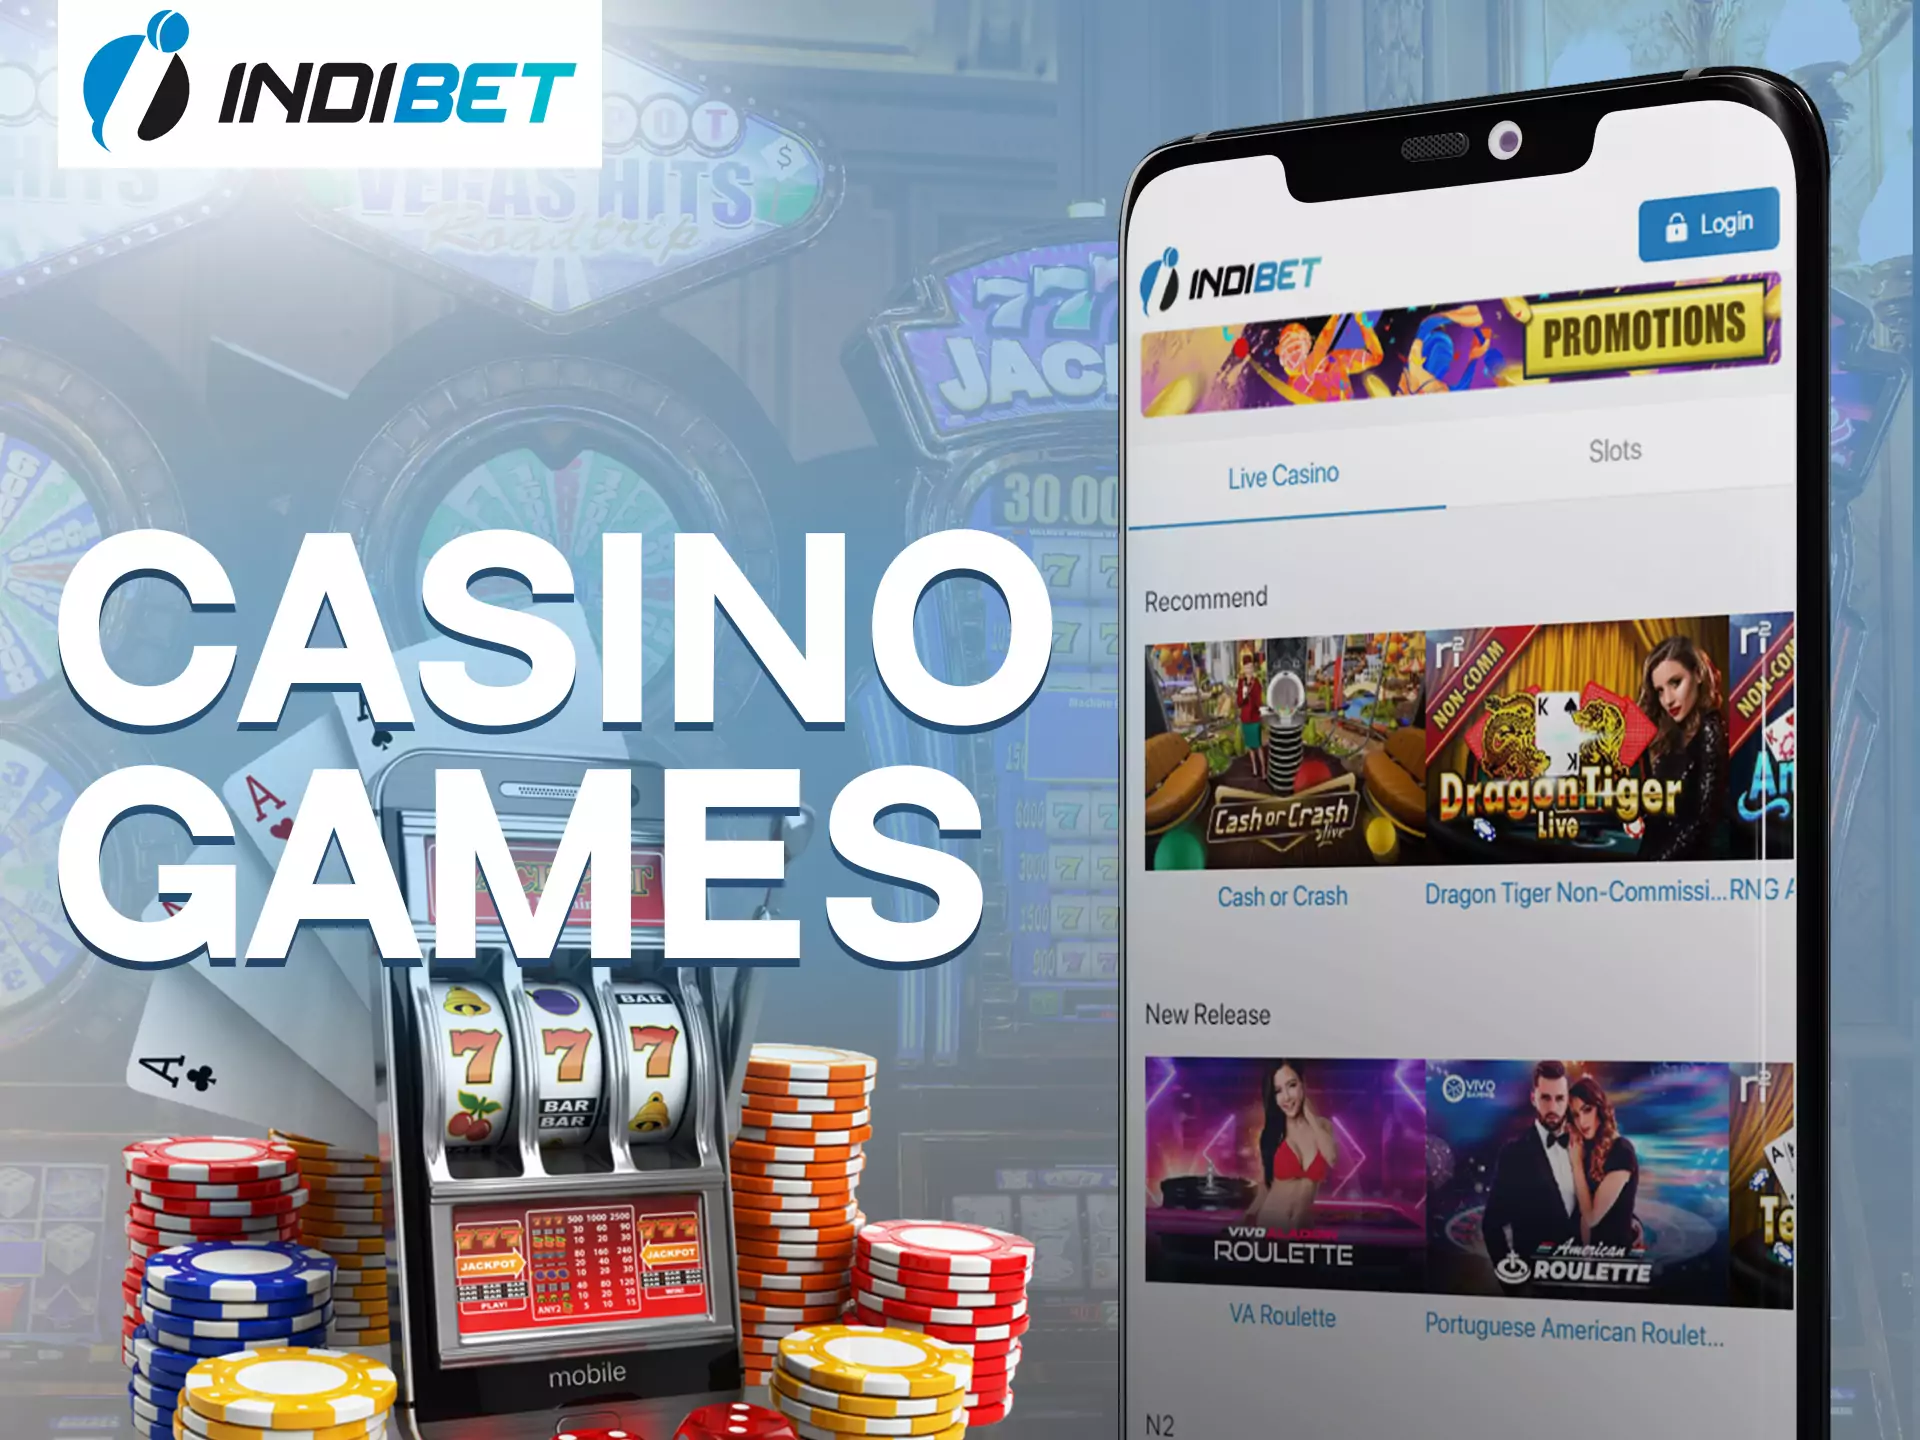 Search for your favourite casino games at Indibet casino.